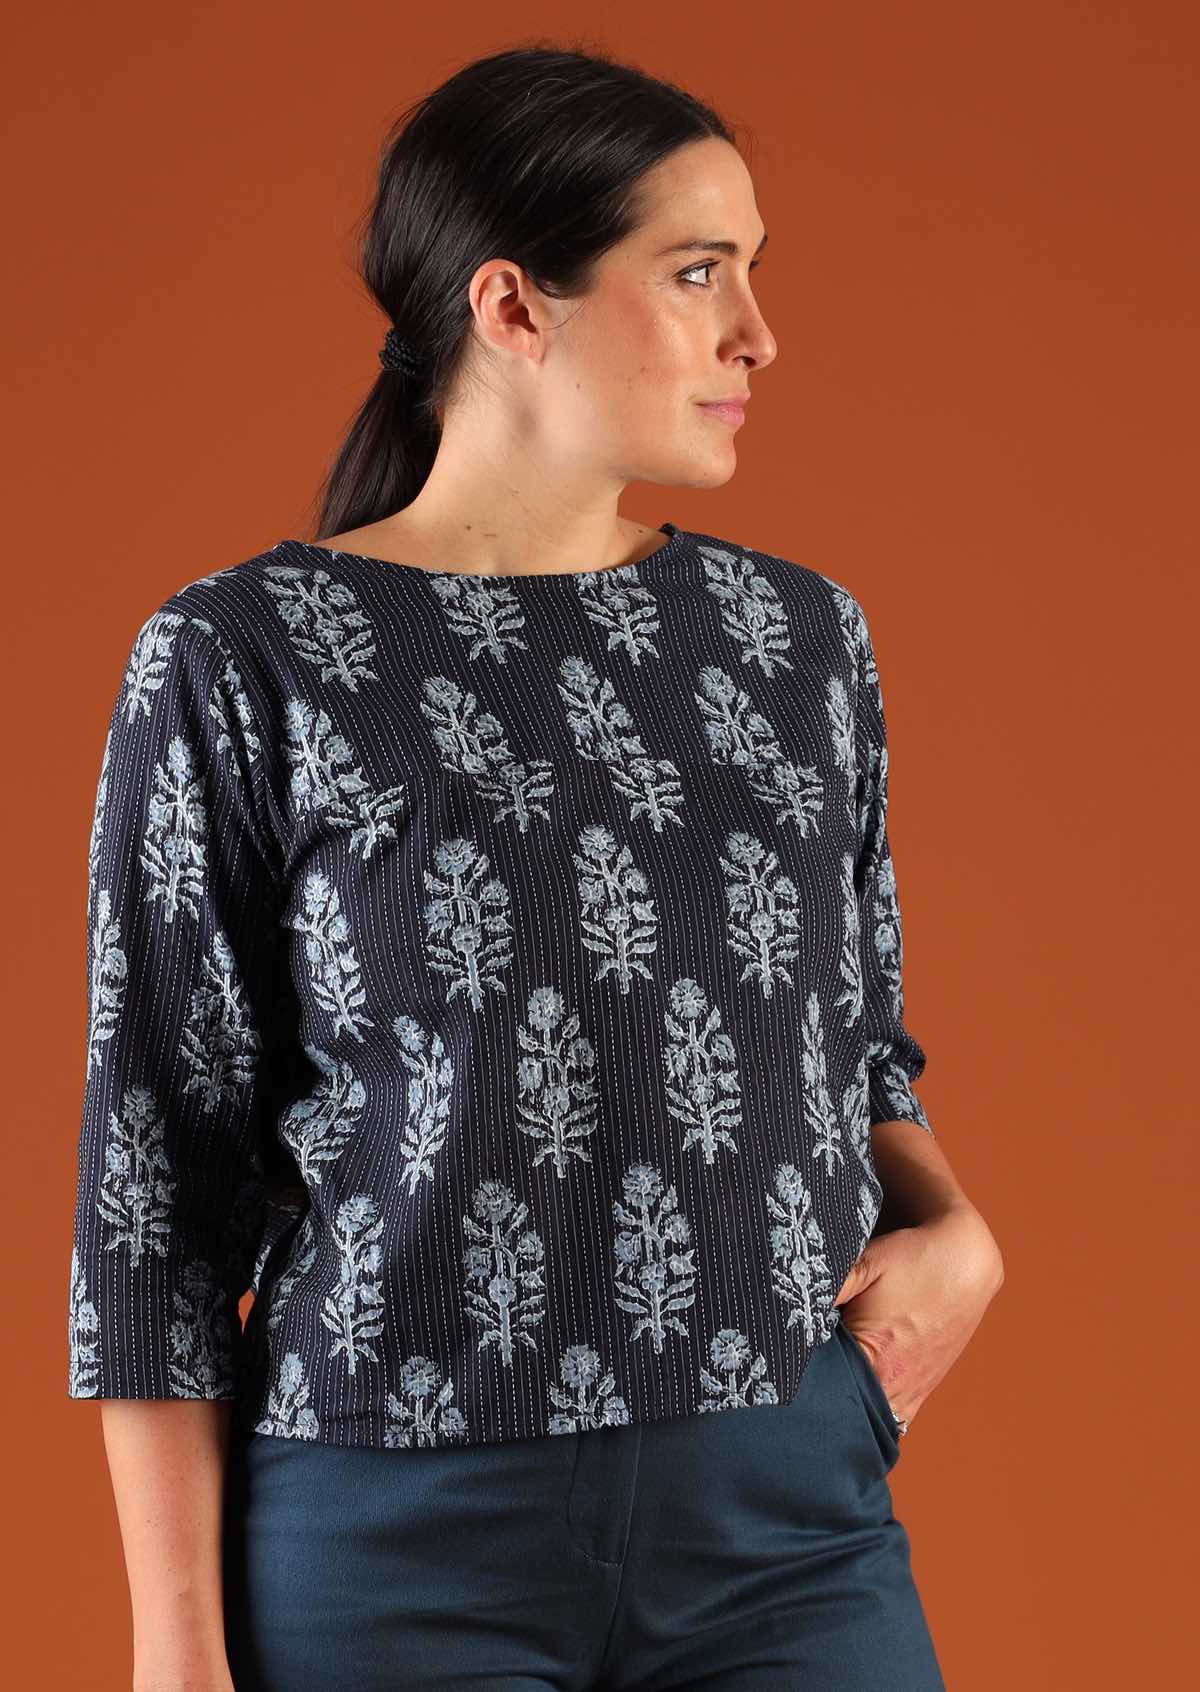 Woman with dark hair in navy blue boxy style blouse with 3/4 sleeves